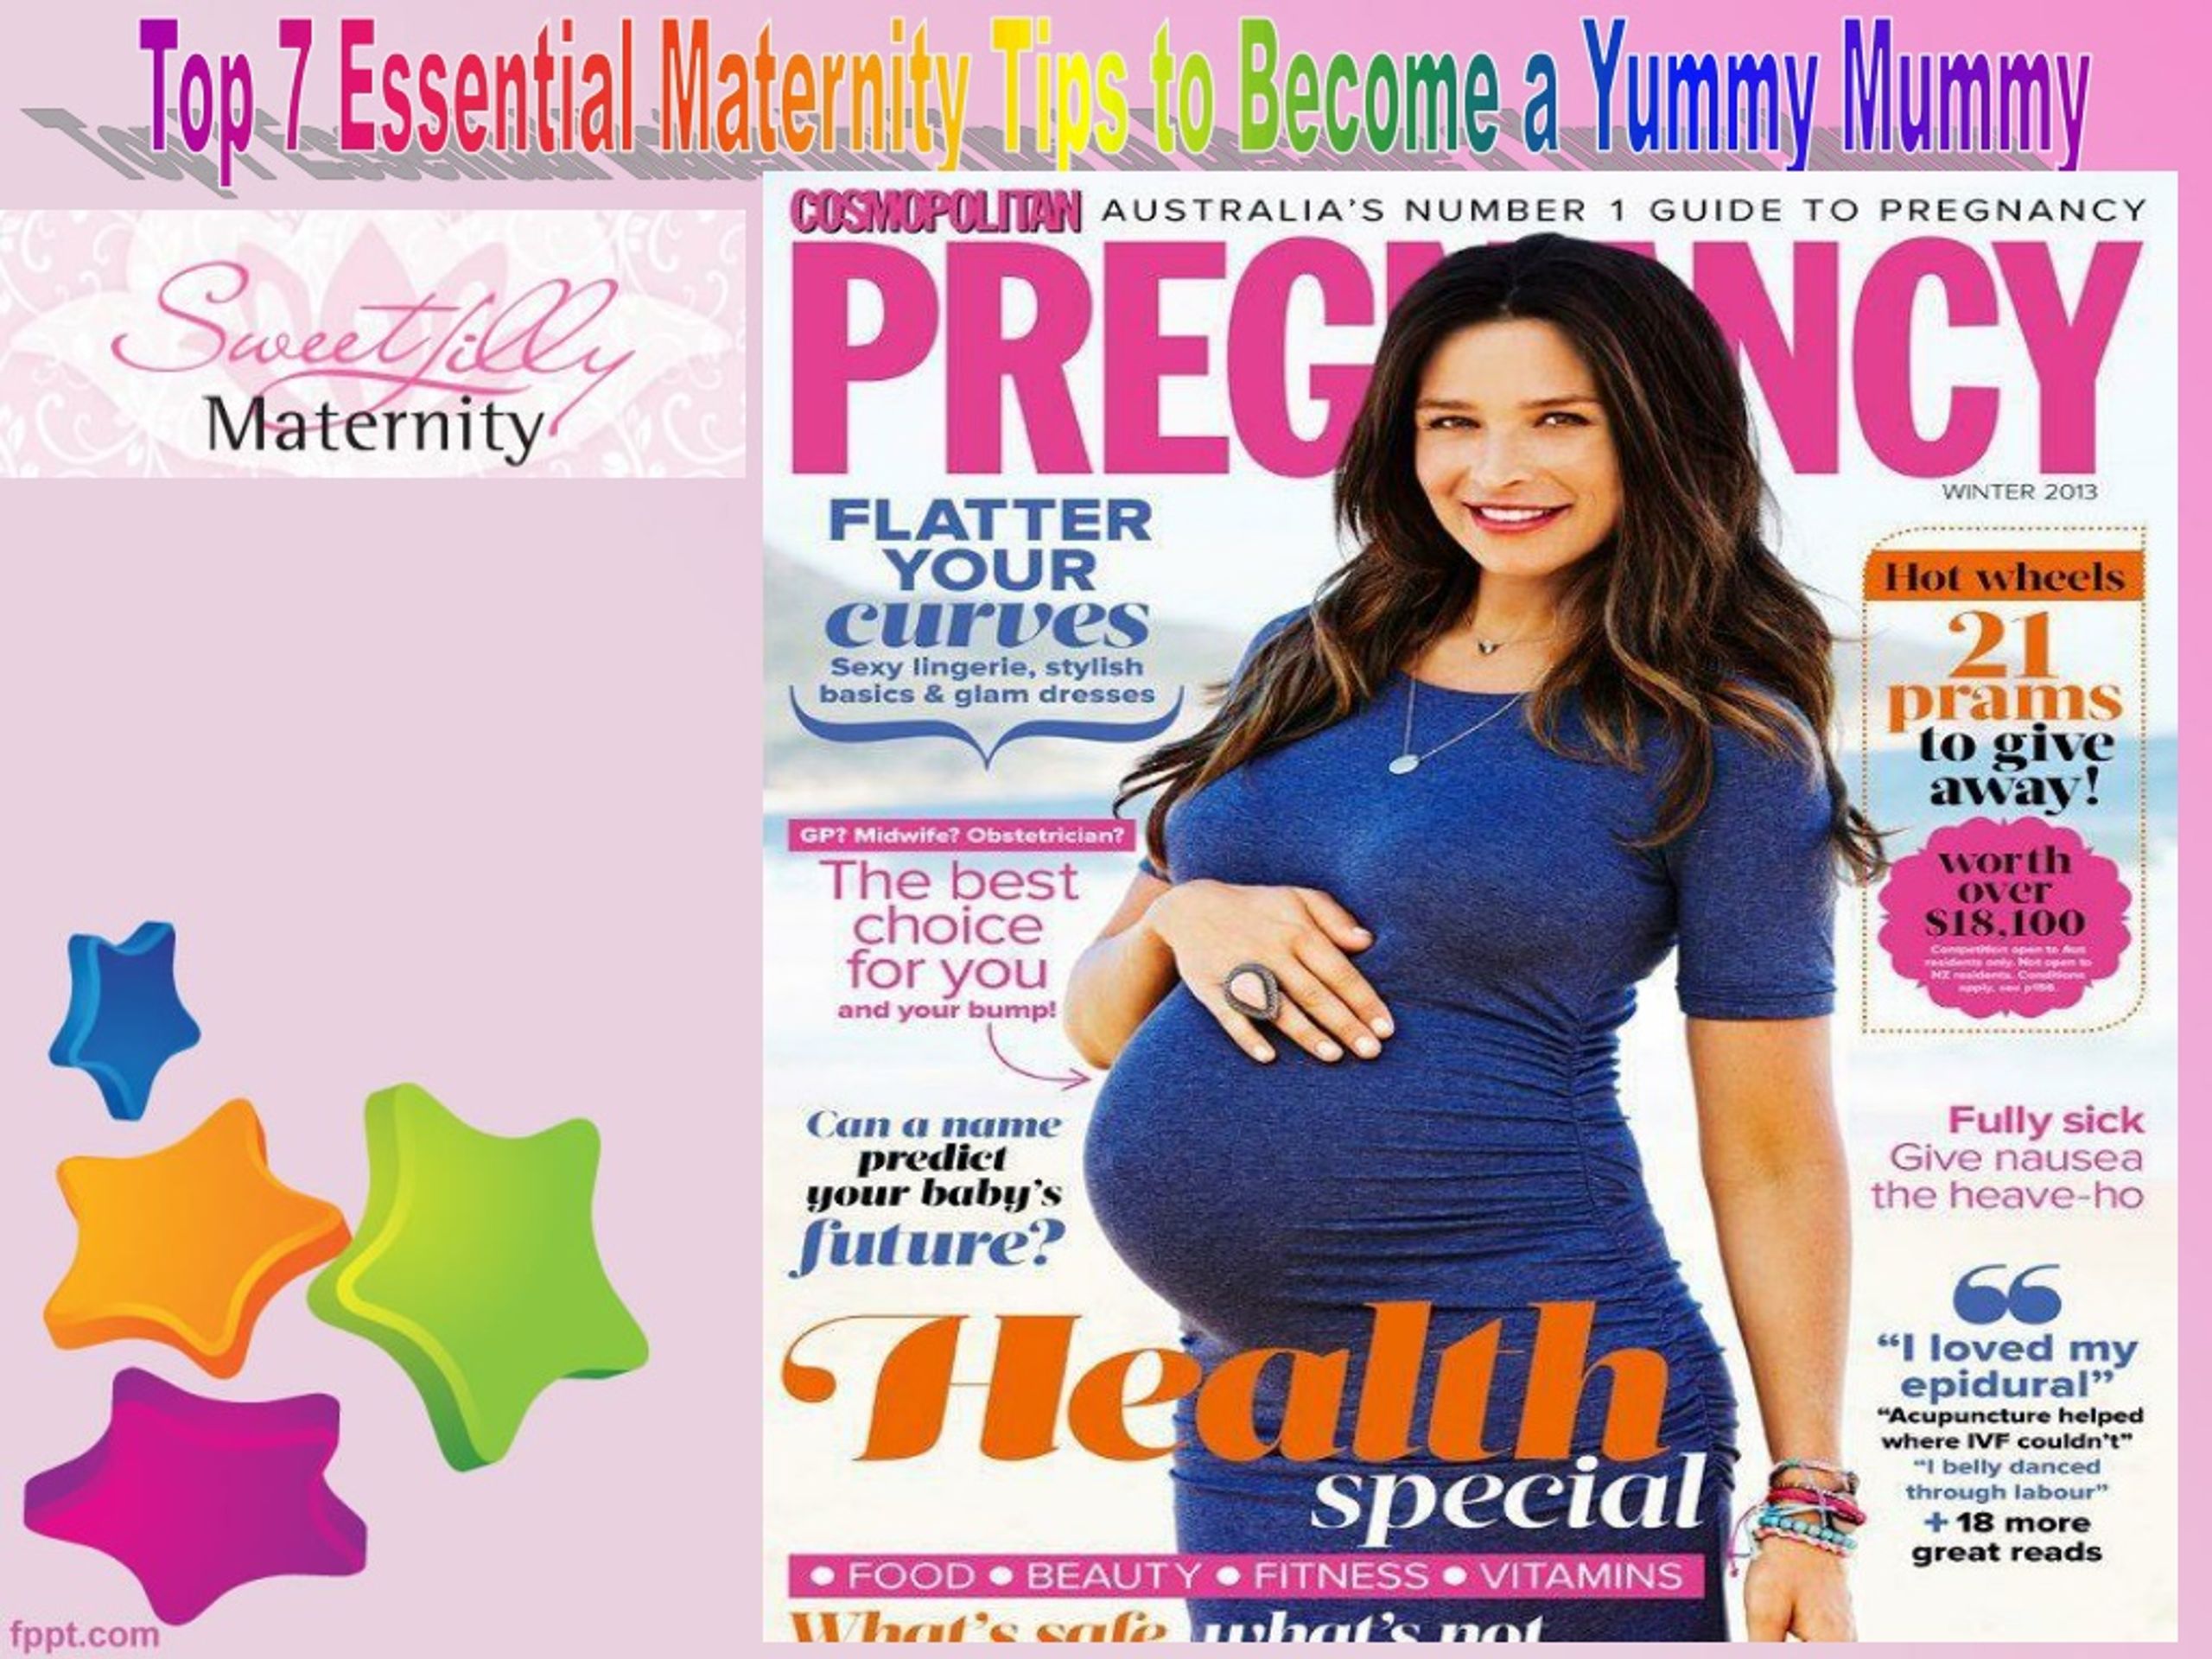 PPT - Top 7 Essential Maternity Tips to Become a Yummy Mummy